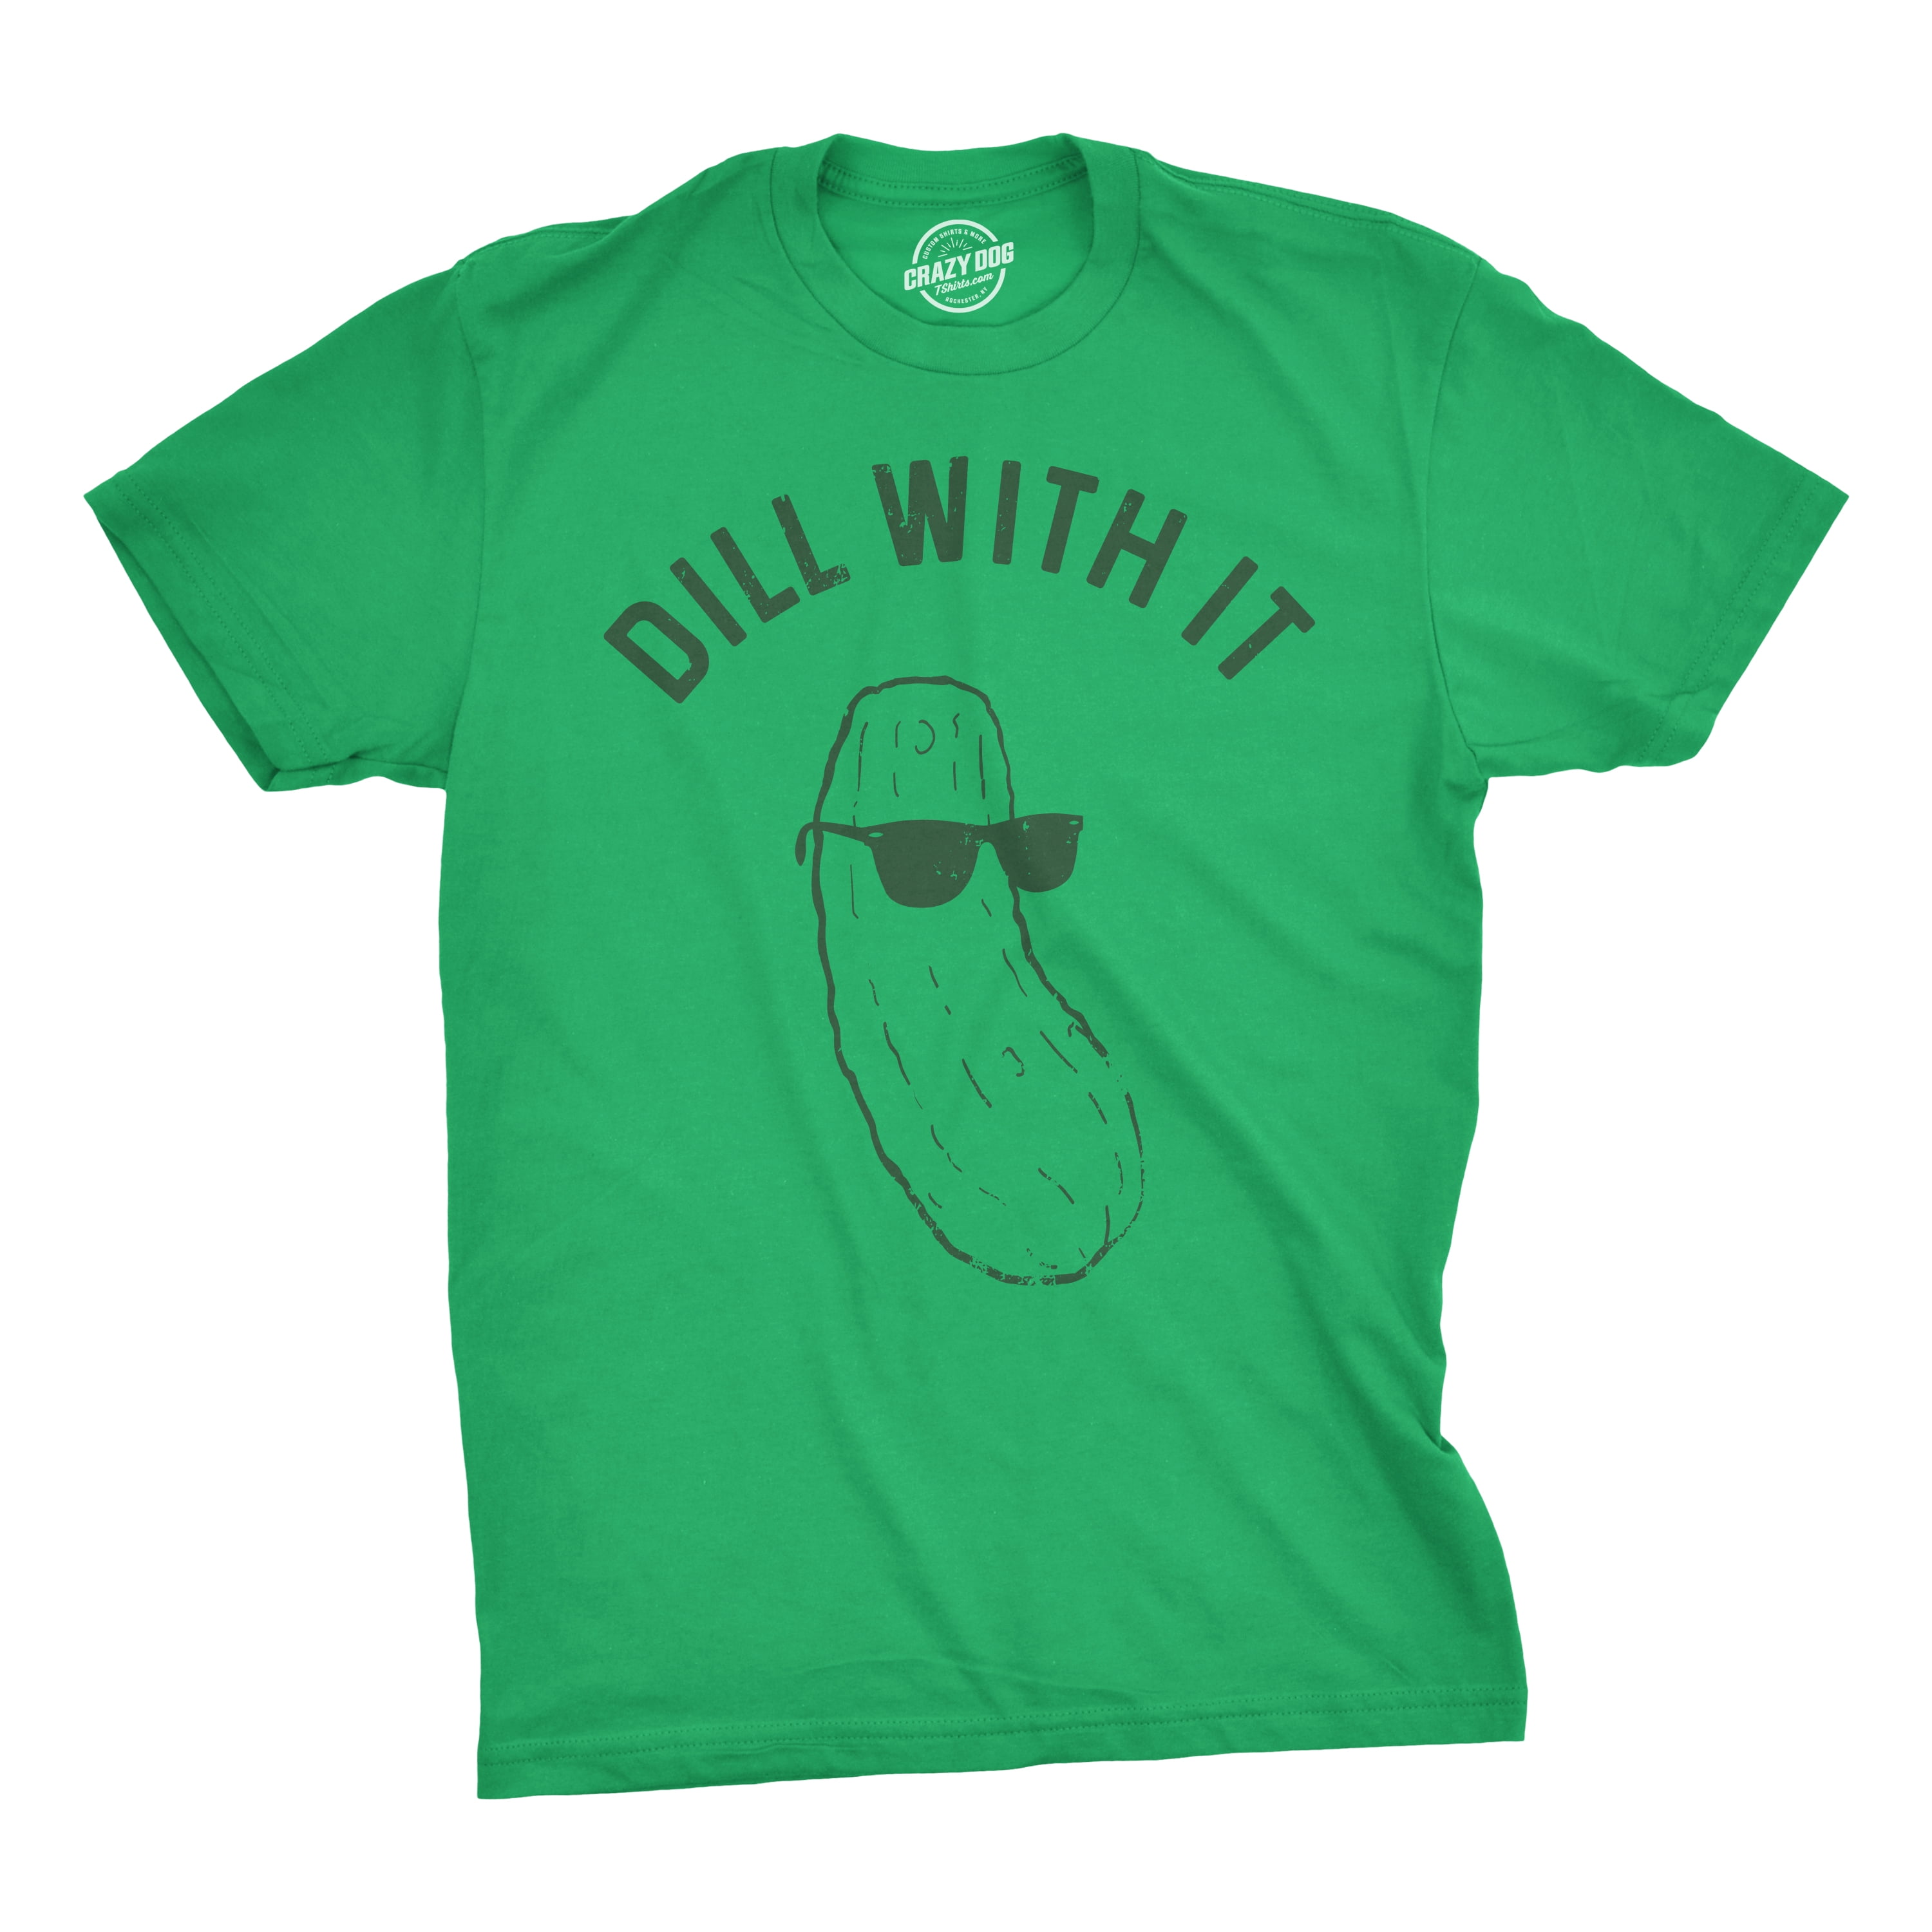 Crazy Dog T-Shirts - Mens Dill With It T shirt Funny Cool ...